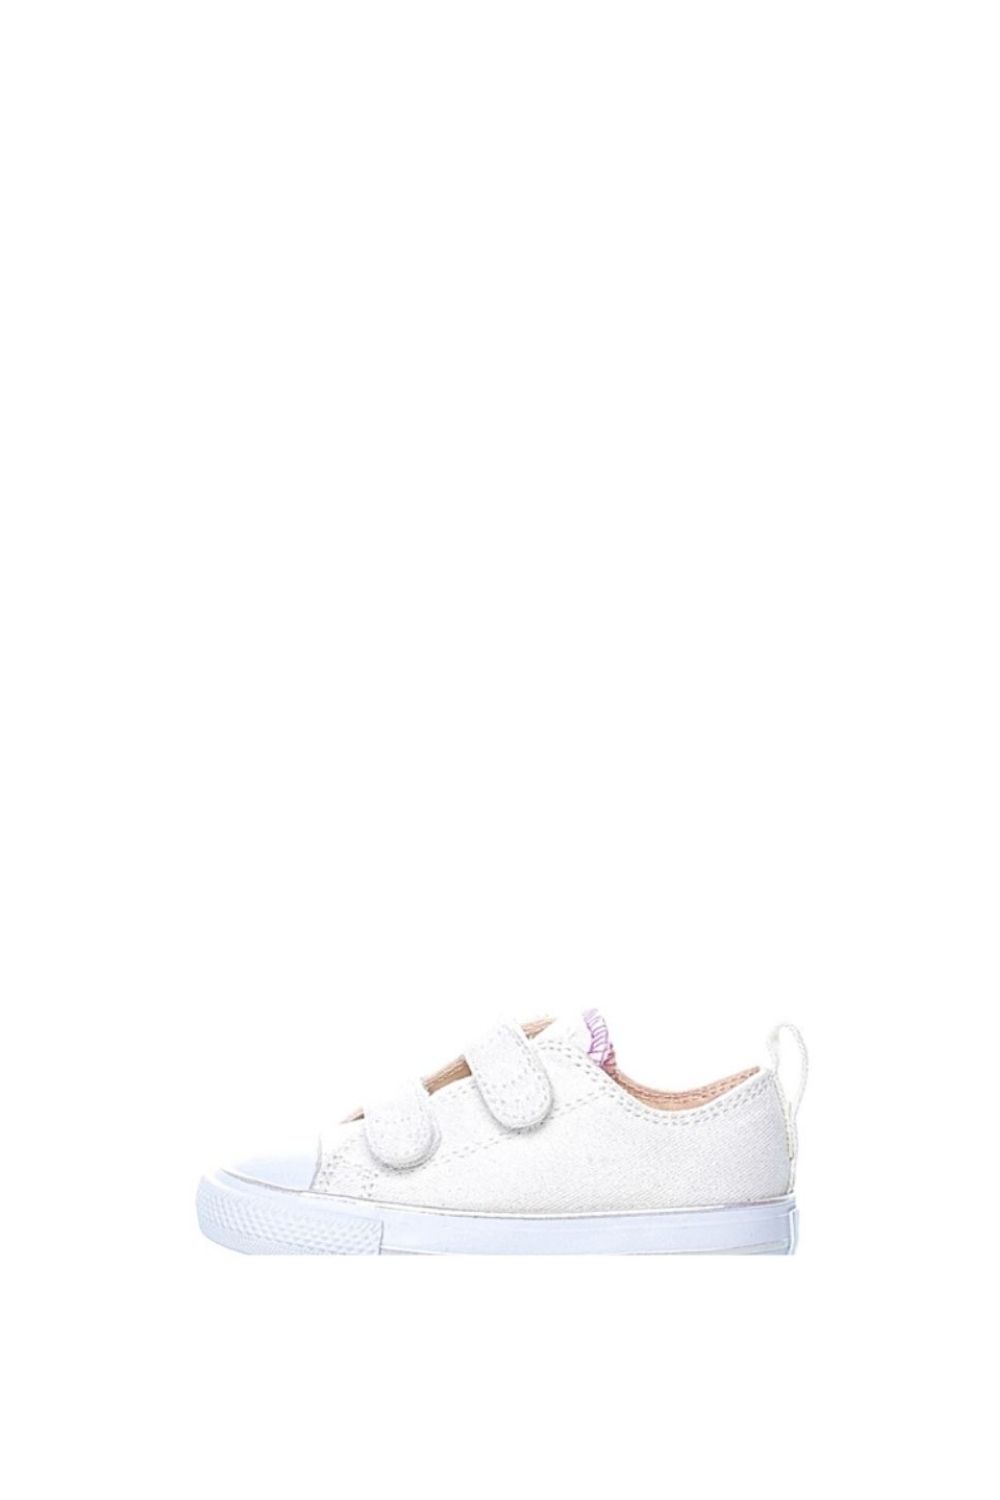 CONVERSE - Βρεφικά sneakers CONVERSE Chuck Taylor All Star 2V Ox εκρού Παιδικά/Baby/Παπούτσια/Sneakers